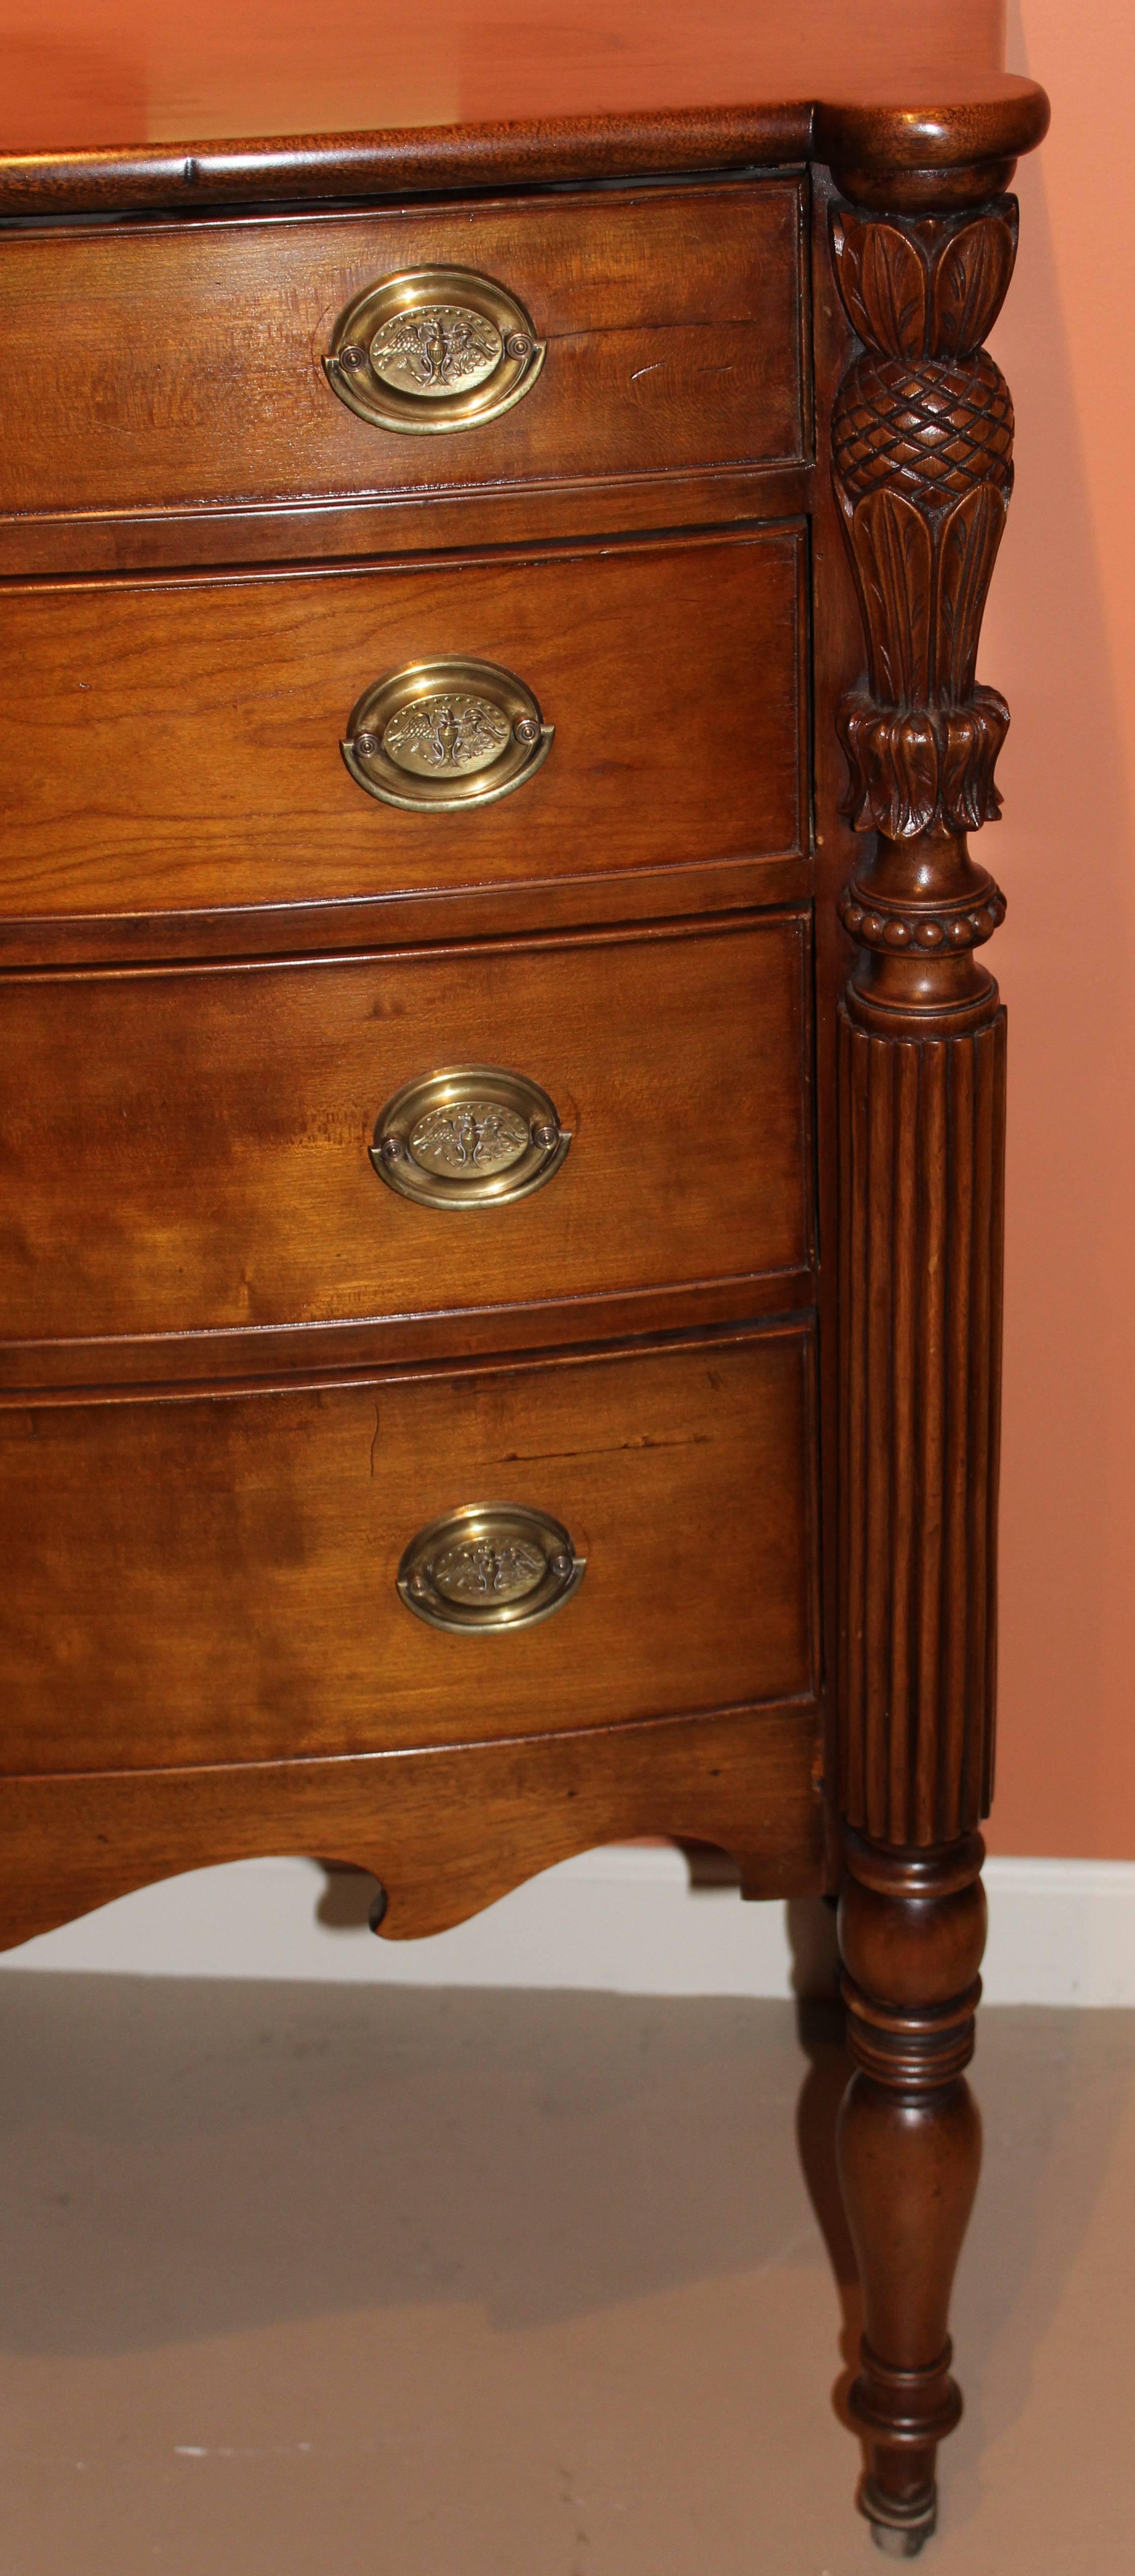 A fine example of a Federal period Sheraton four drawer chest of the Samuel McIntire School, Salem, MA. The top with ovolu corners above a conforming swell front of four graduated and beaded drawers and nicely shaped apron all flanked by turned and